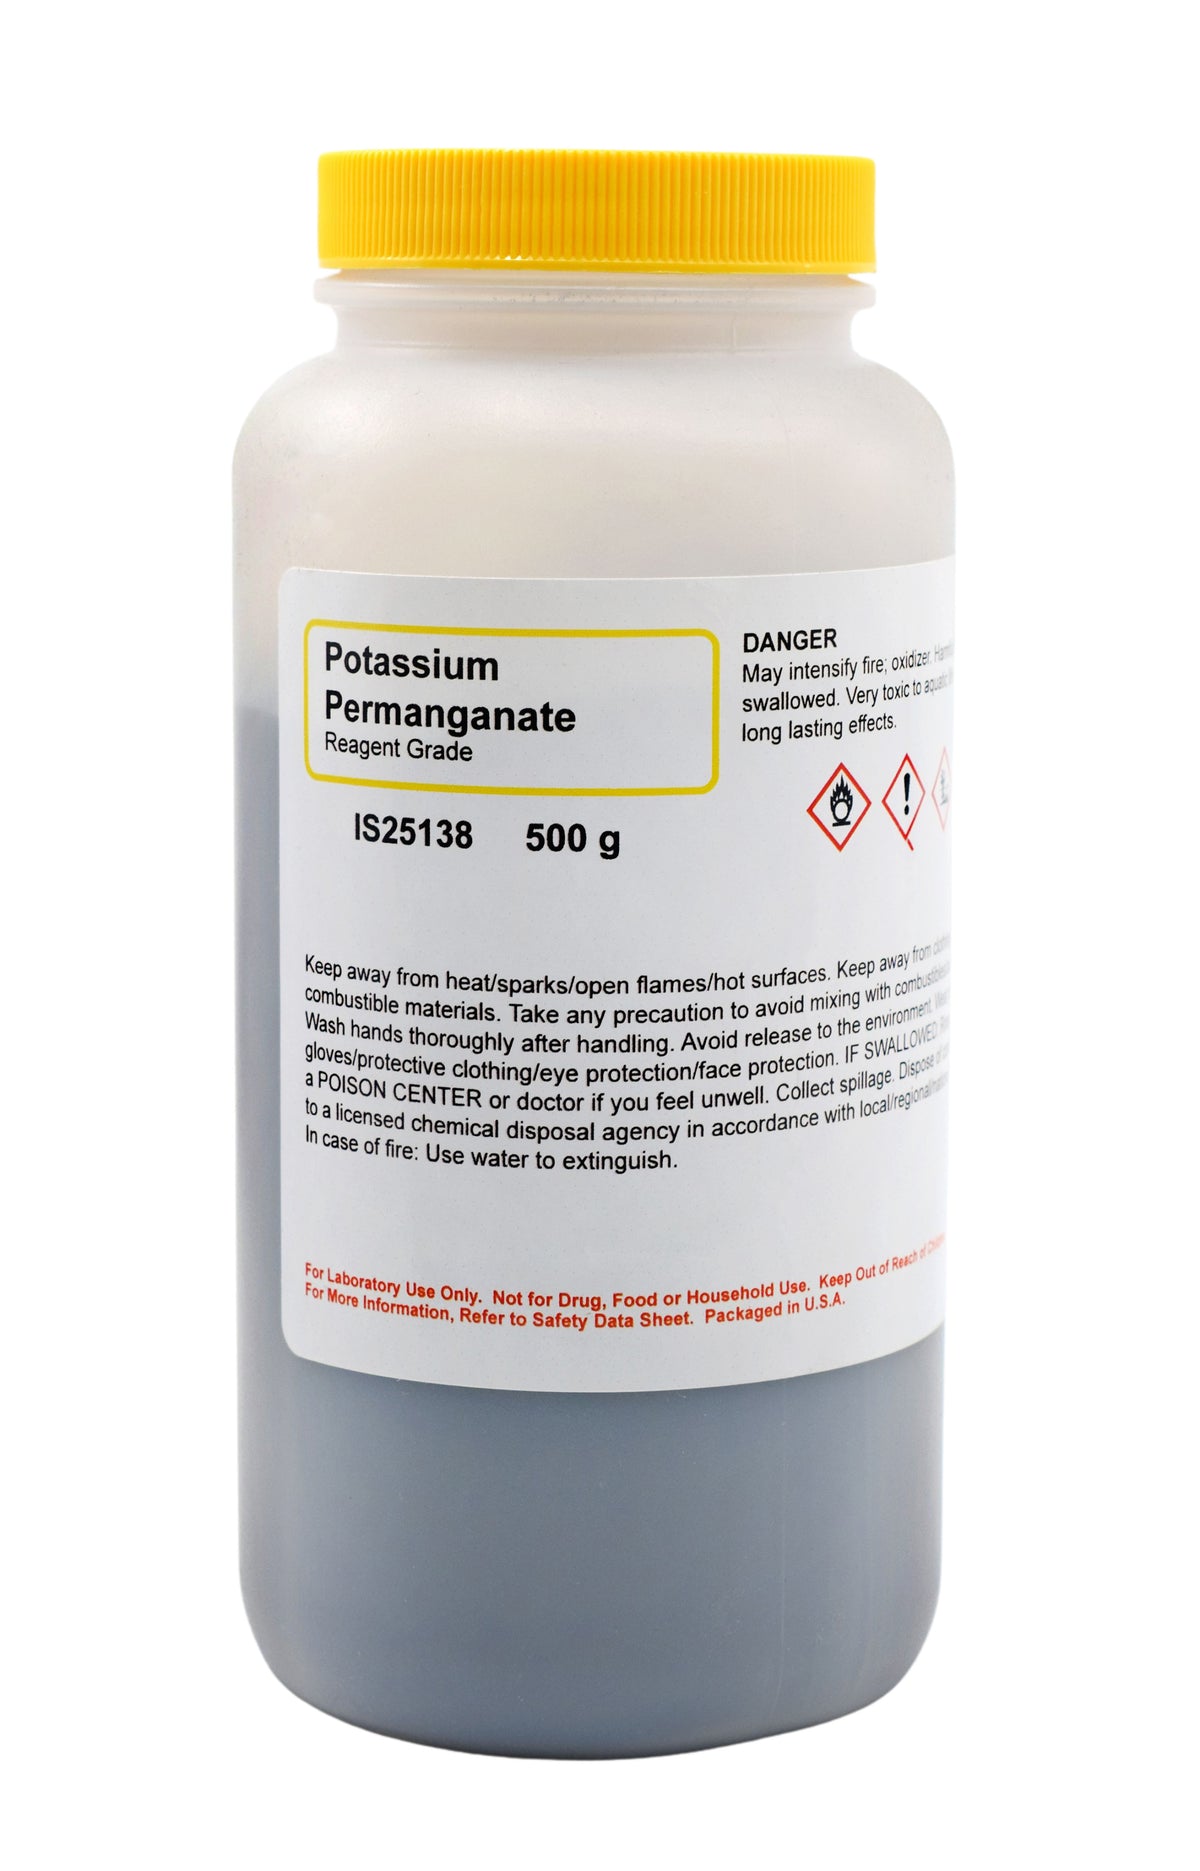 Potassium Permanganate, 100g - Reagent Grade - The Curated Chemical  Collection by Innovating Science